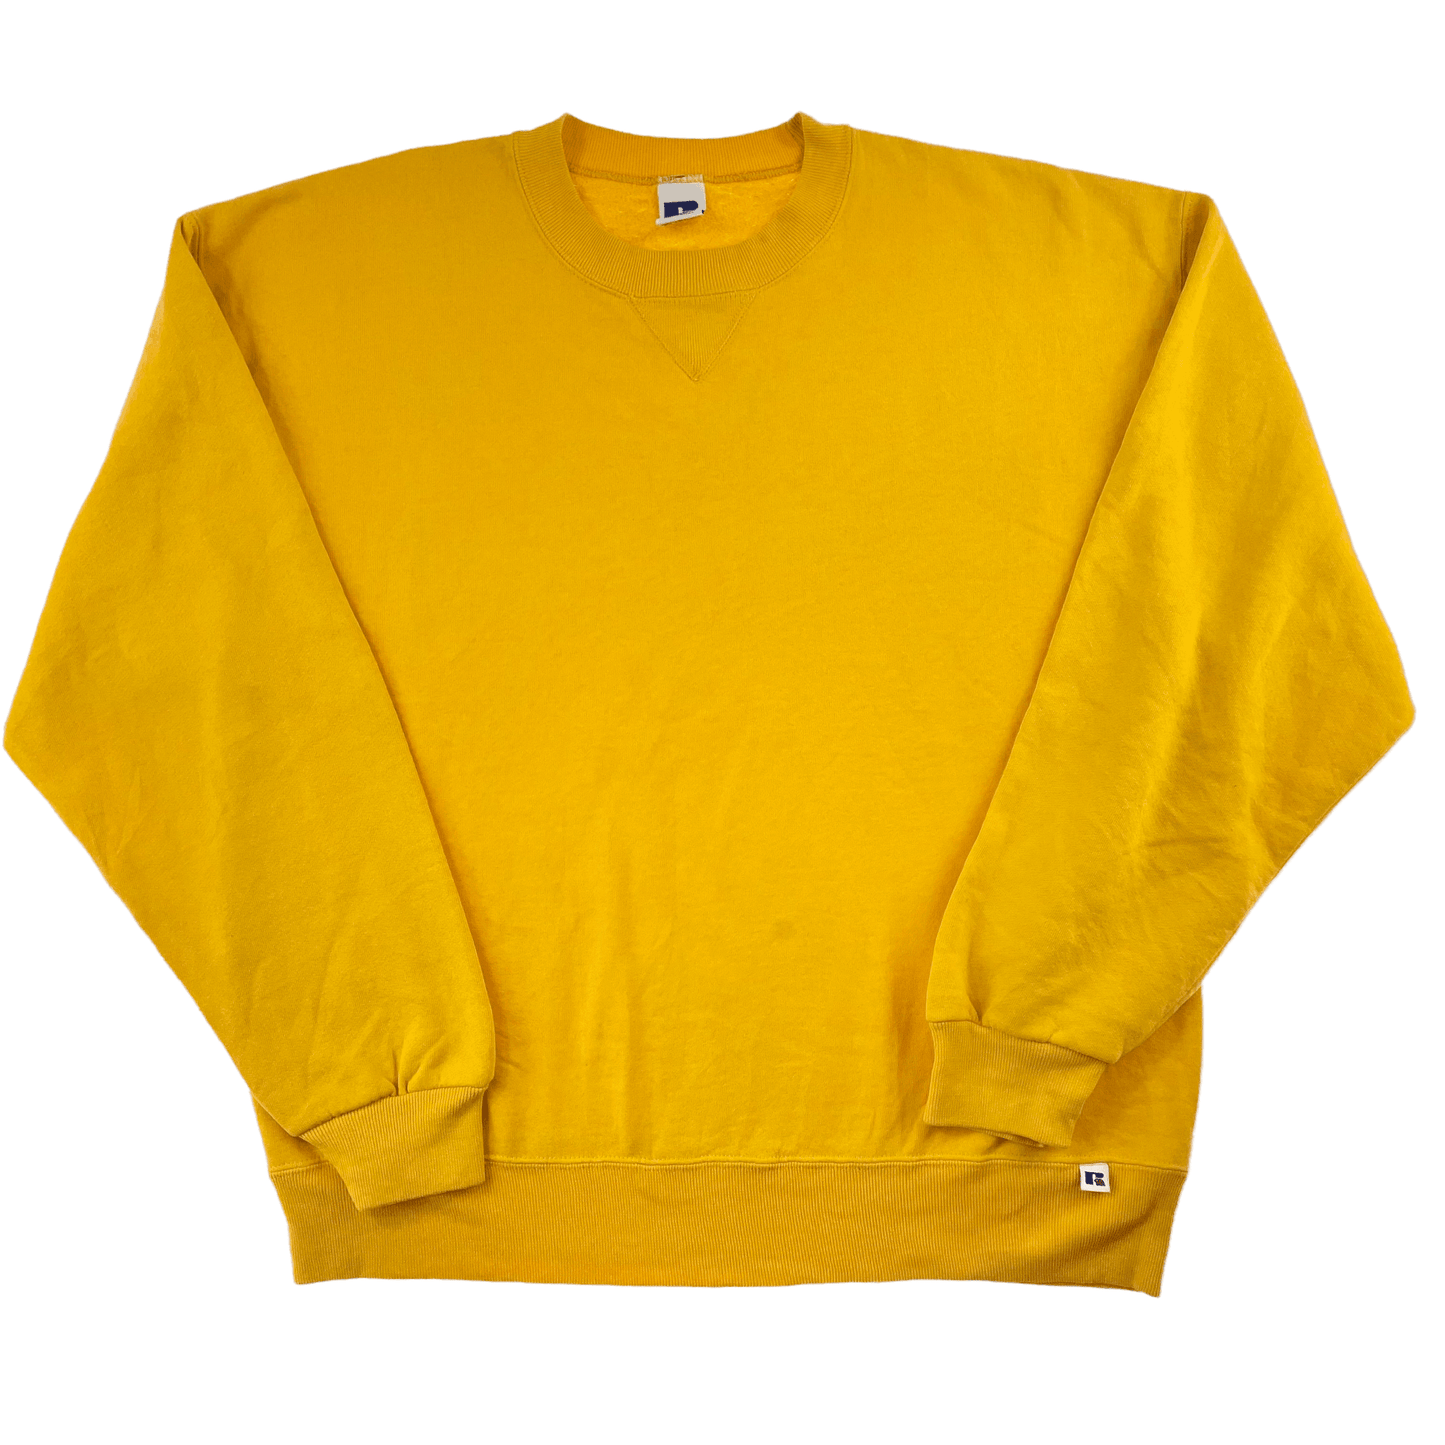 Vintage Russell jumper size L - Known Source